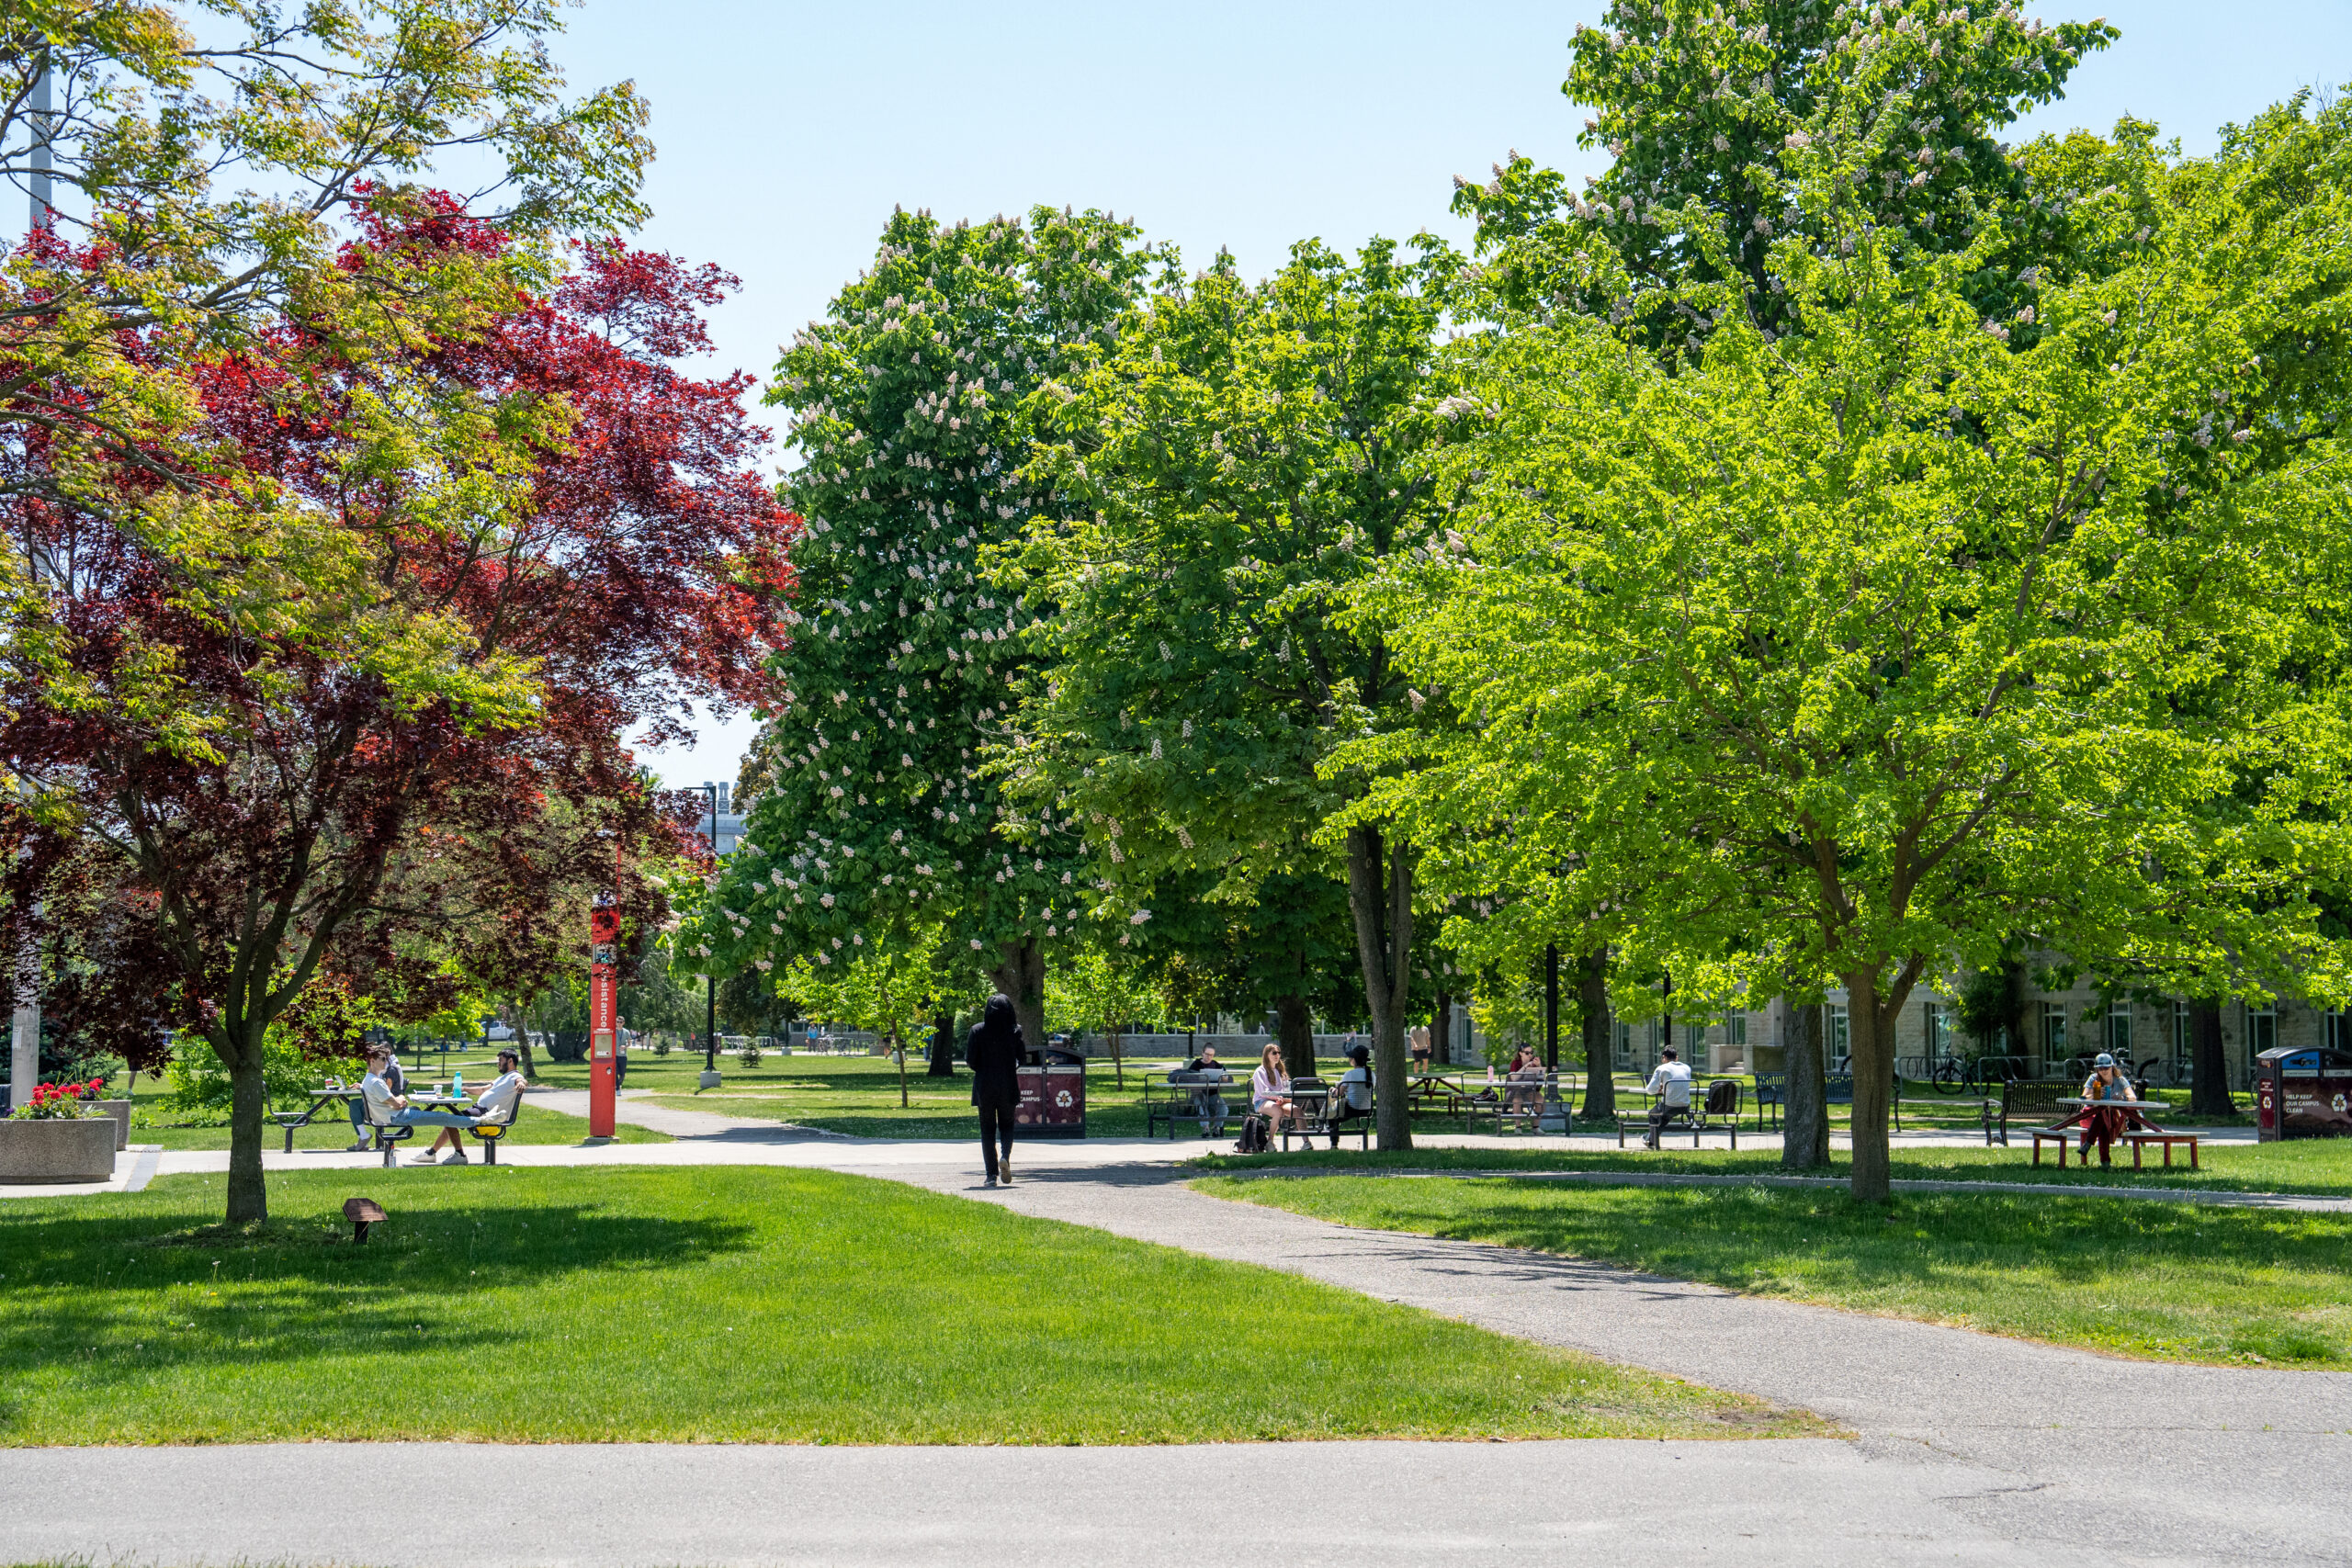 McMaster University campus in the spring